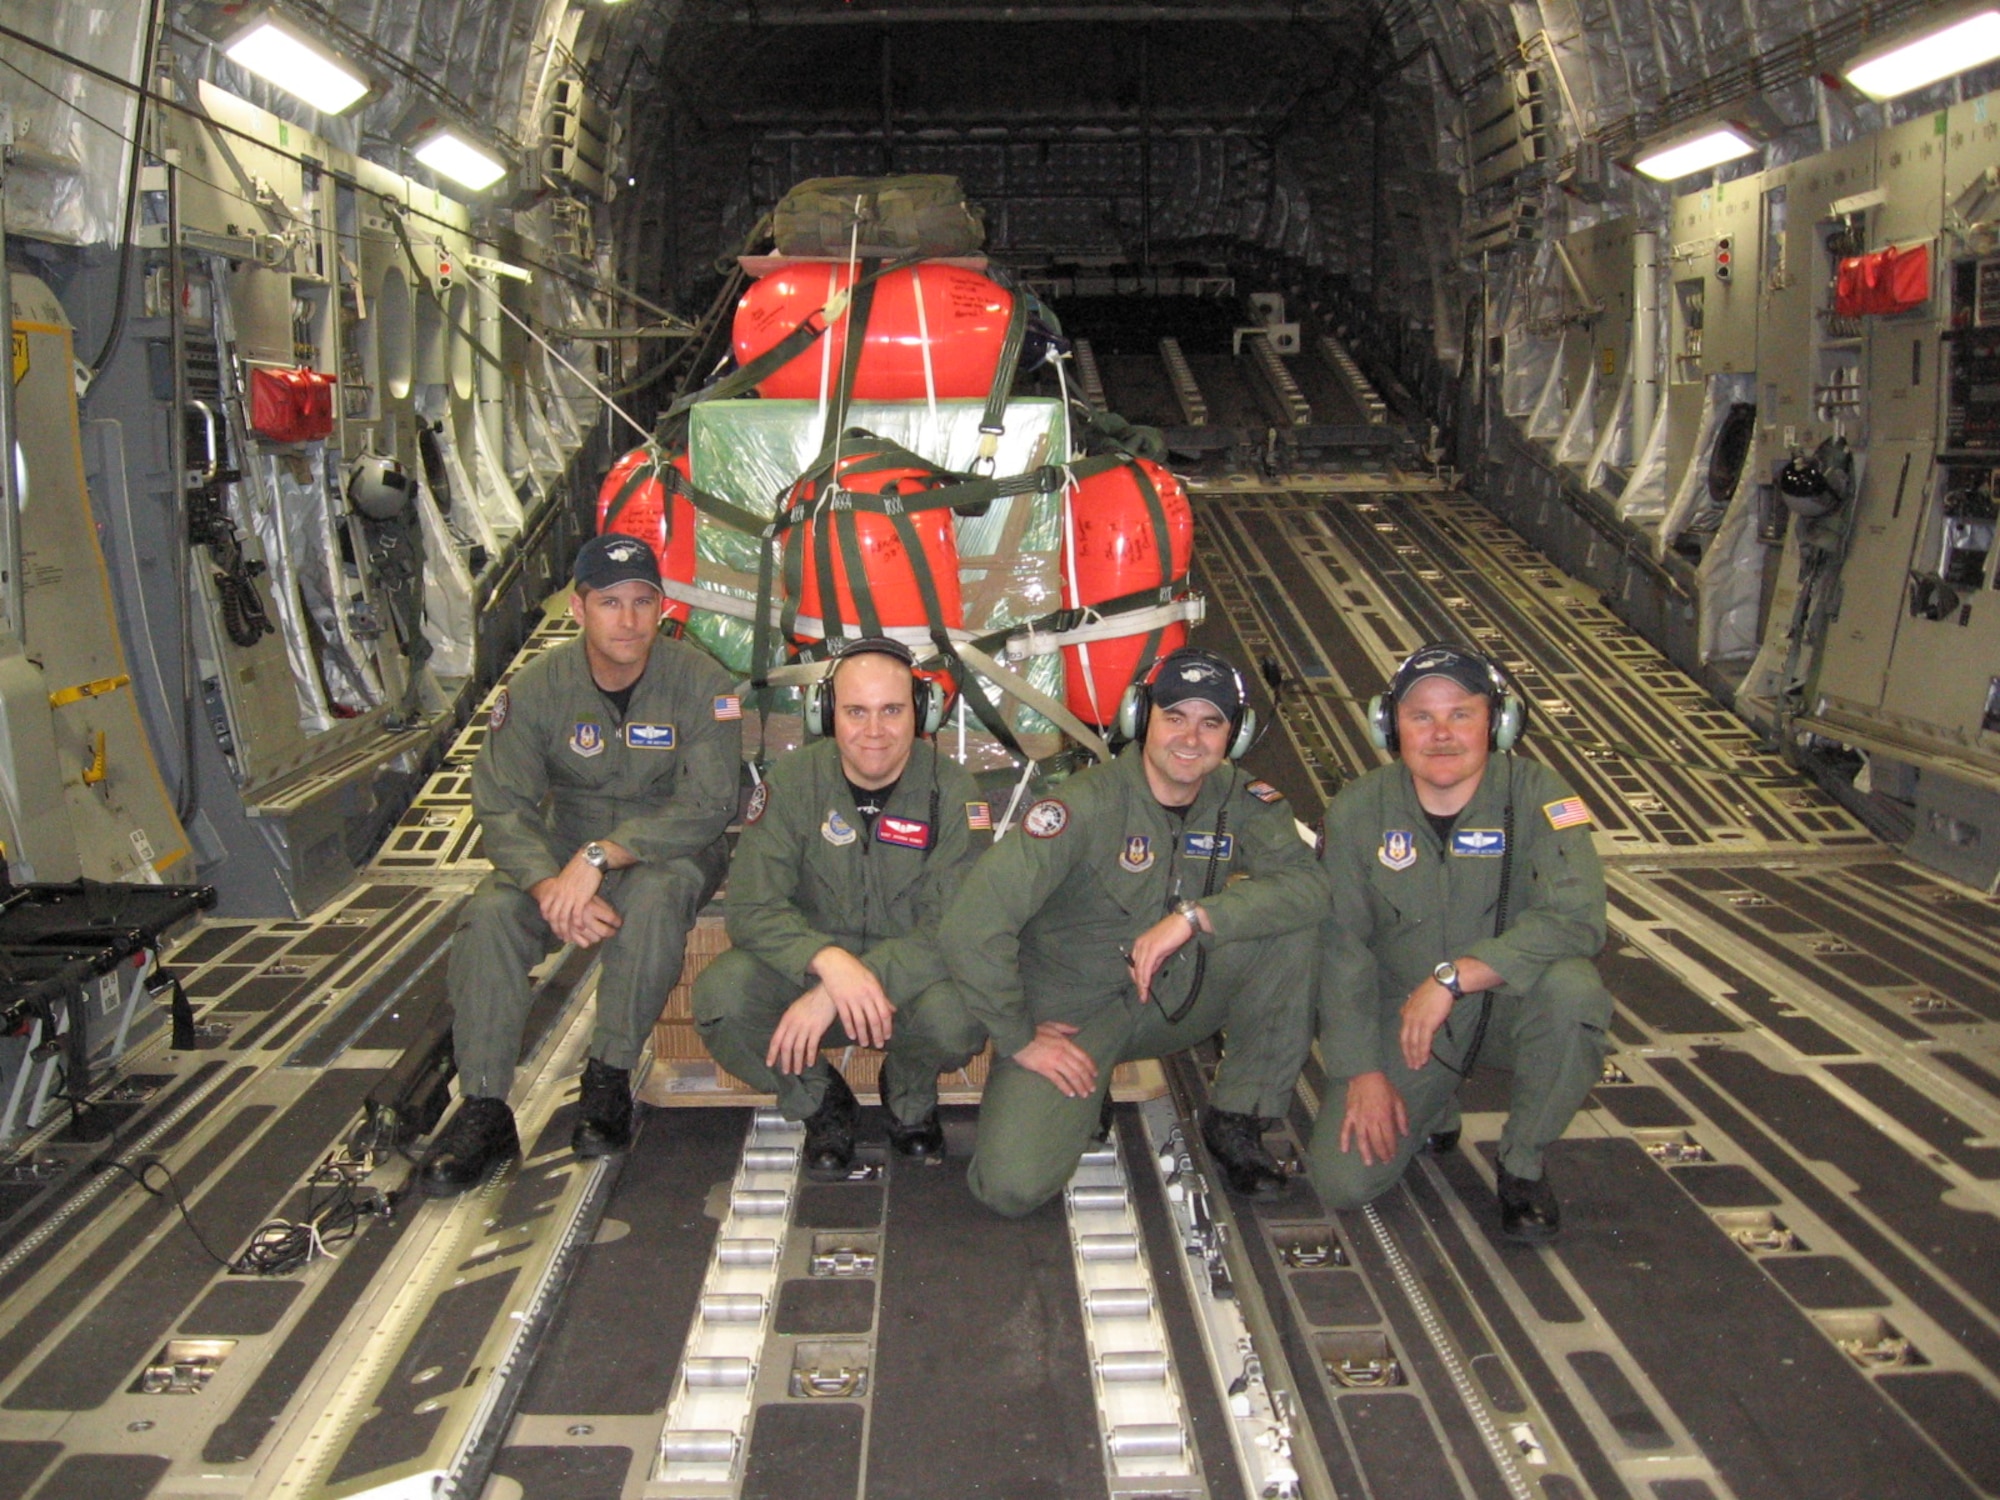 Chief Master Sgt. James Masura Jr., 313th Airlift Squadron loadmaster, and 304th Expeditionary Air Squadron loadmasters, pause for a photo with the airdrop equipment to aid a fishing vessel broken down in the Antarctic. Argos Georgia had suffered serious engine failure while heading south in the Ross Sea, leaving it without propulsion and drifting with the ice Jan. 4, 2008, according to an article released by PACAF Public Affairs. The vessel needed critical engine repair parts airdropped to them so crews could fix damaged caused by navigating the icy waters. (Courtesy photo)